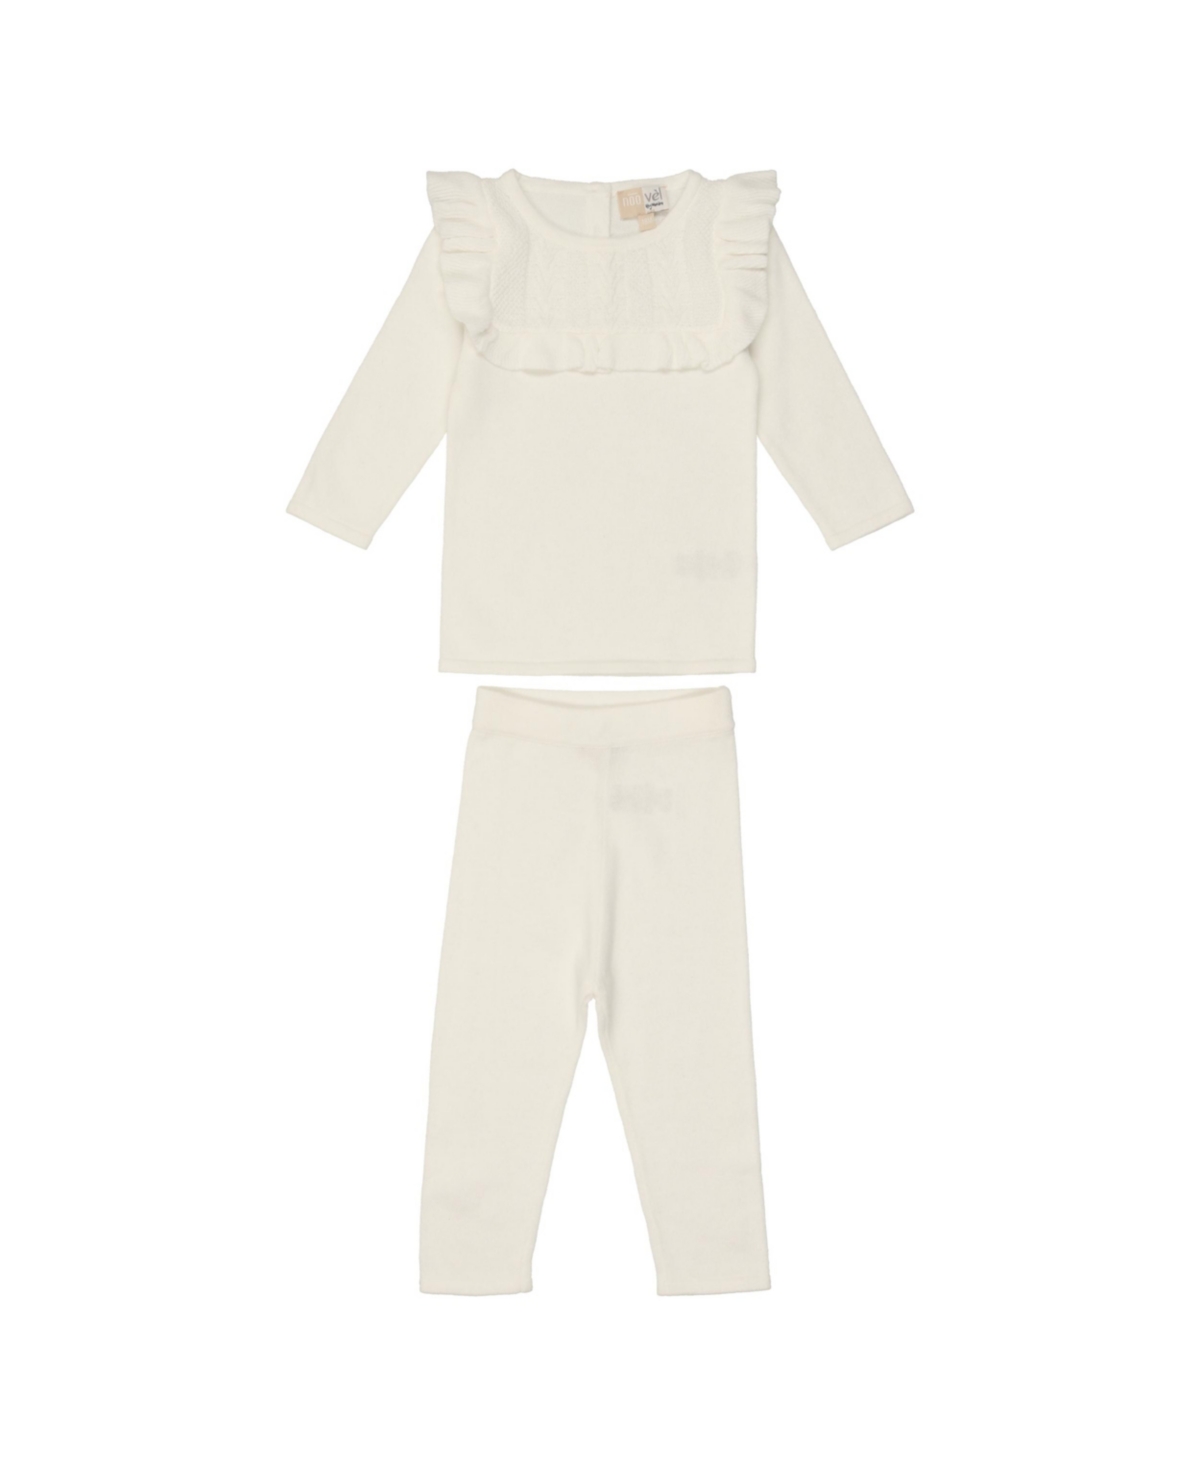 Maniere Baby Girls Noovel Knit Top And Pants, 2 Piece Set In Ivory